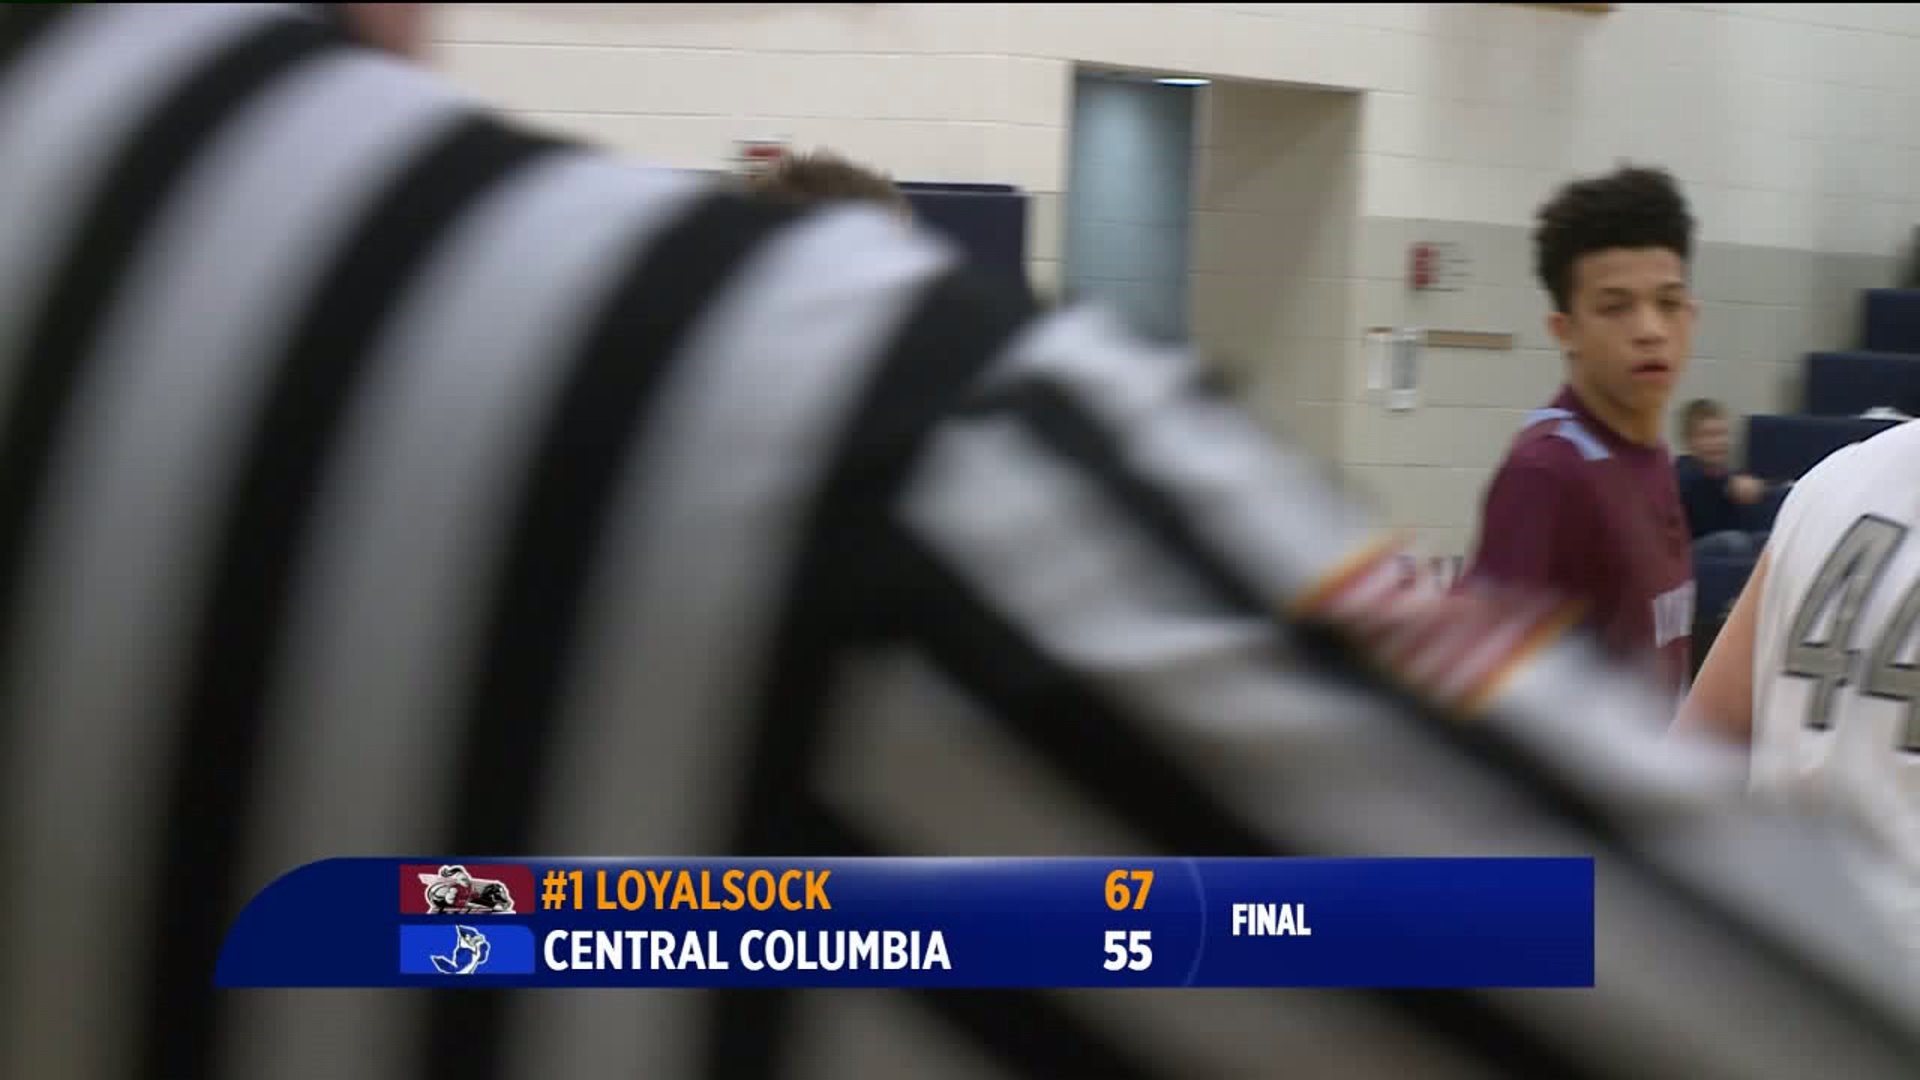 No. 1 Loyalsock Passes Road Test At Central Columbia